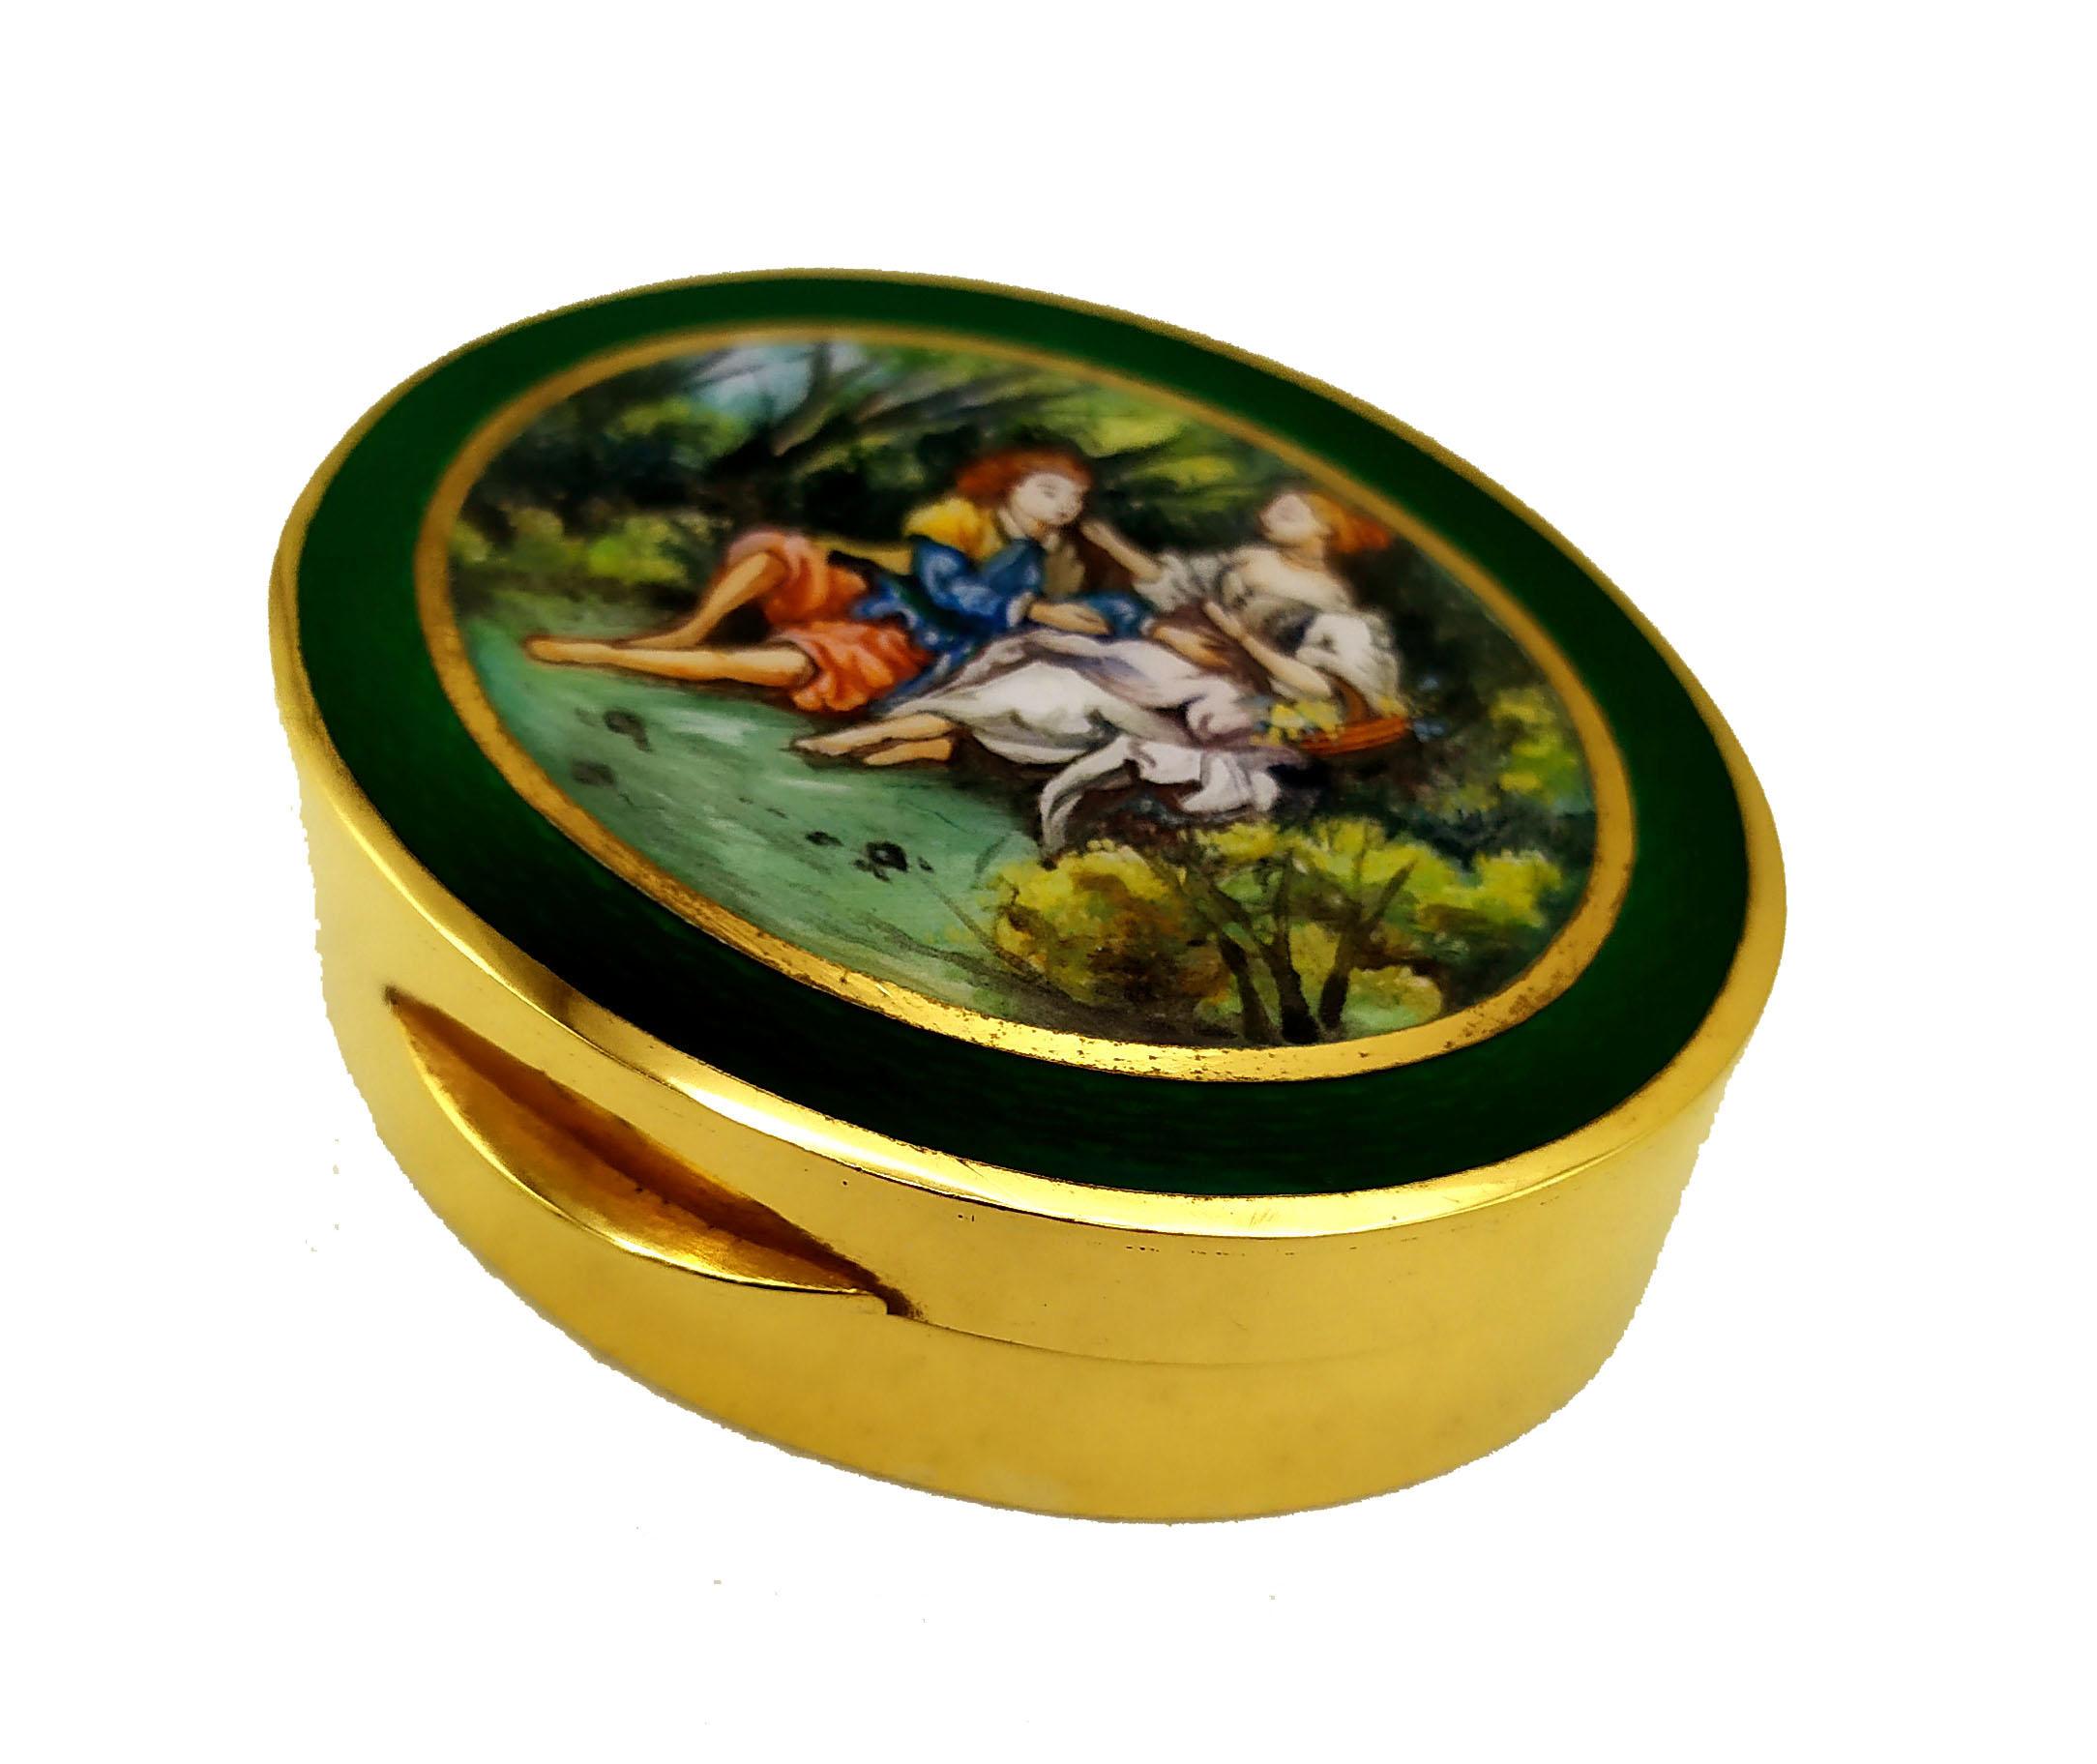 Pill Box Silver Sterling Enamel Miniature Sailing Ship is in 925/1000 sterling silver gold plated 24 carats.
Pill Box Silver is with translucent fired enamels on guilloché.
Pill Box Silver has a hand-painted miniature depicting a couple in the